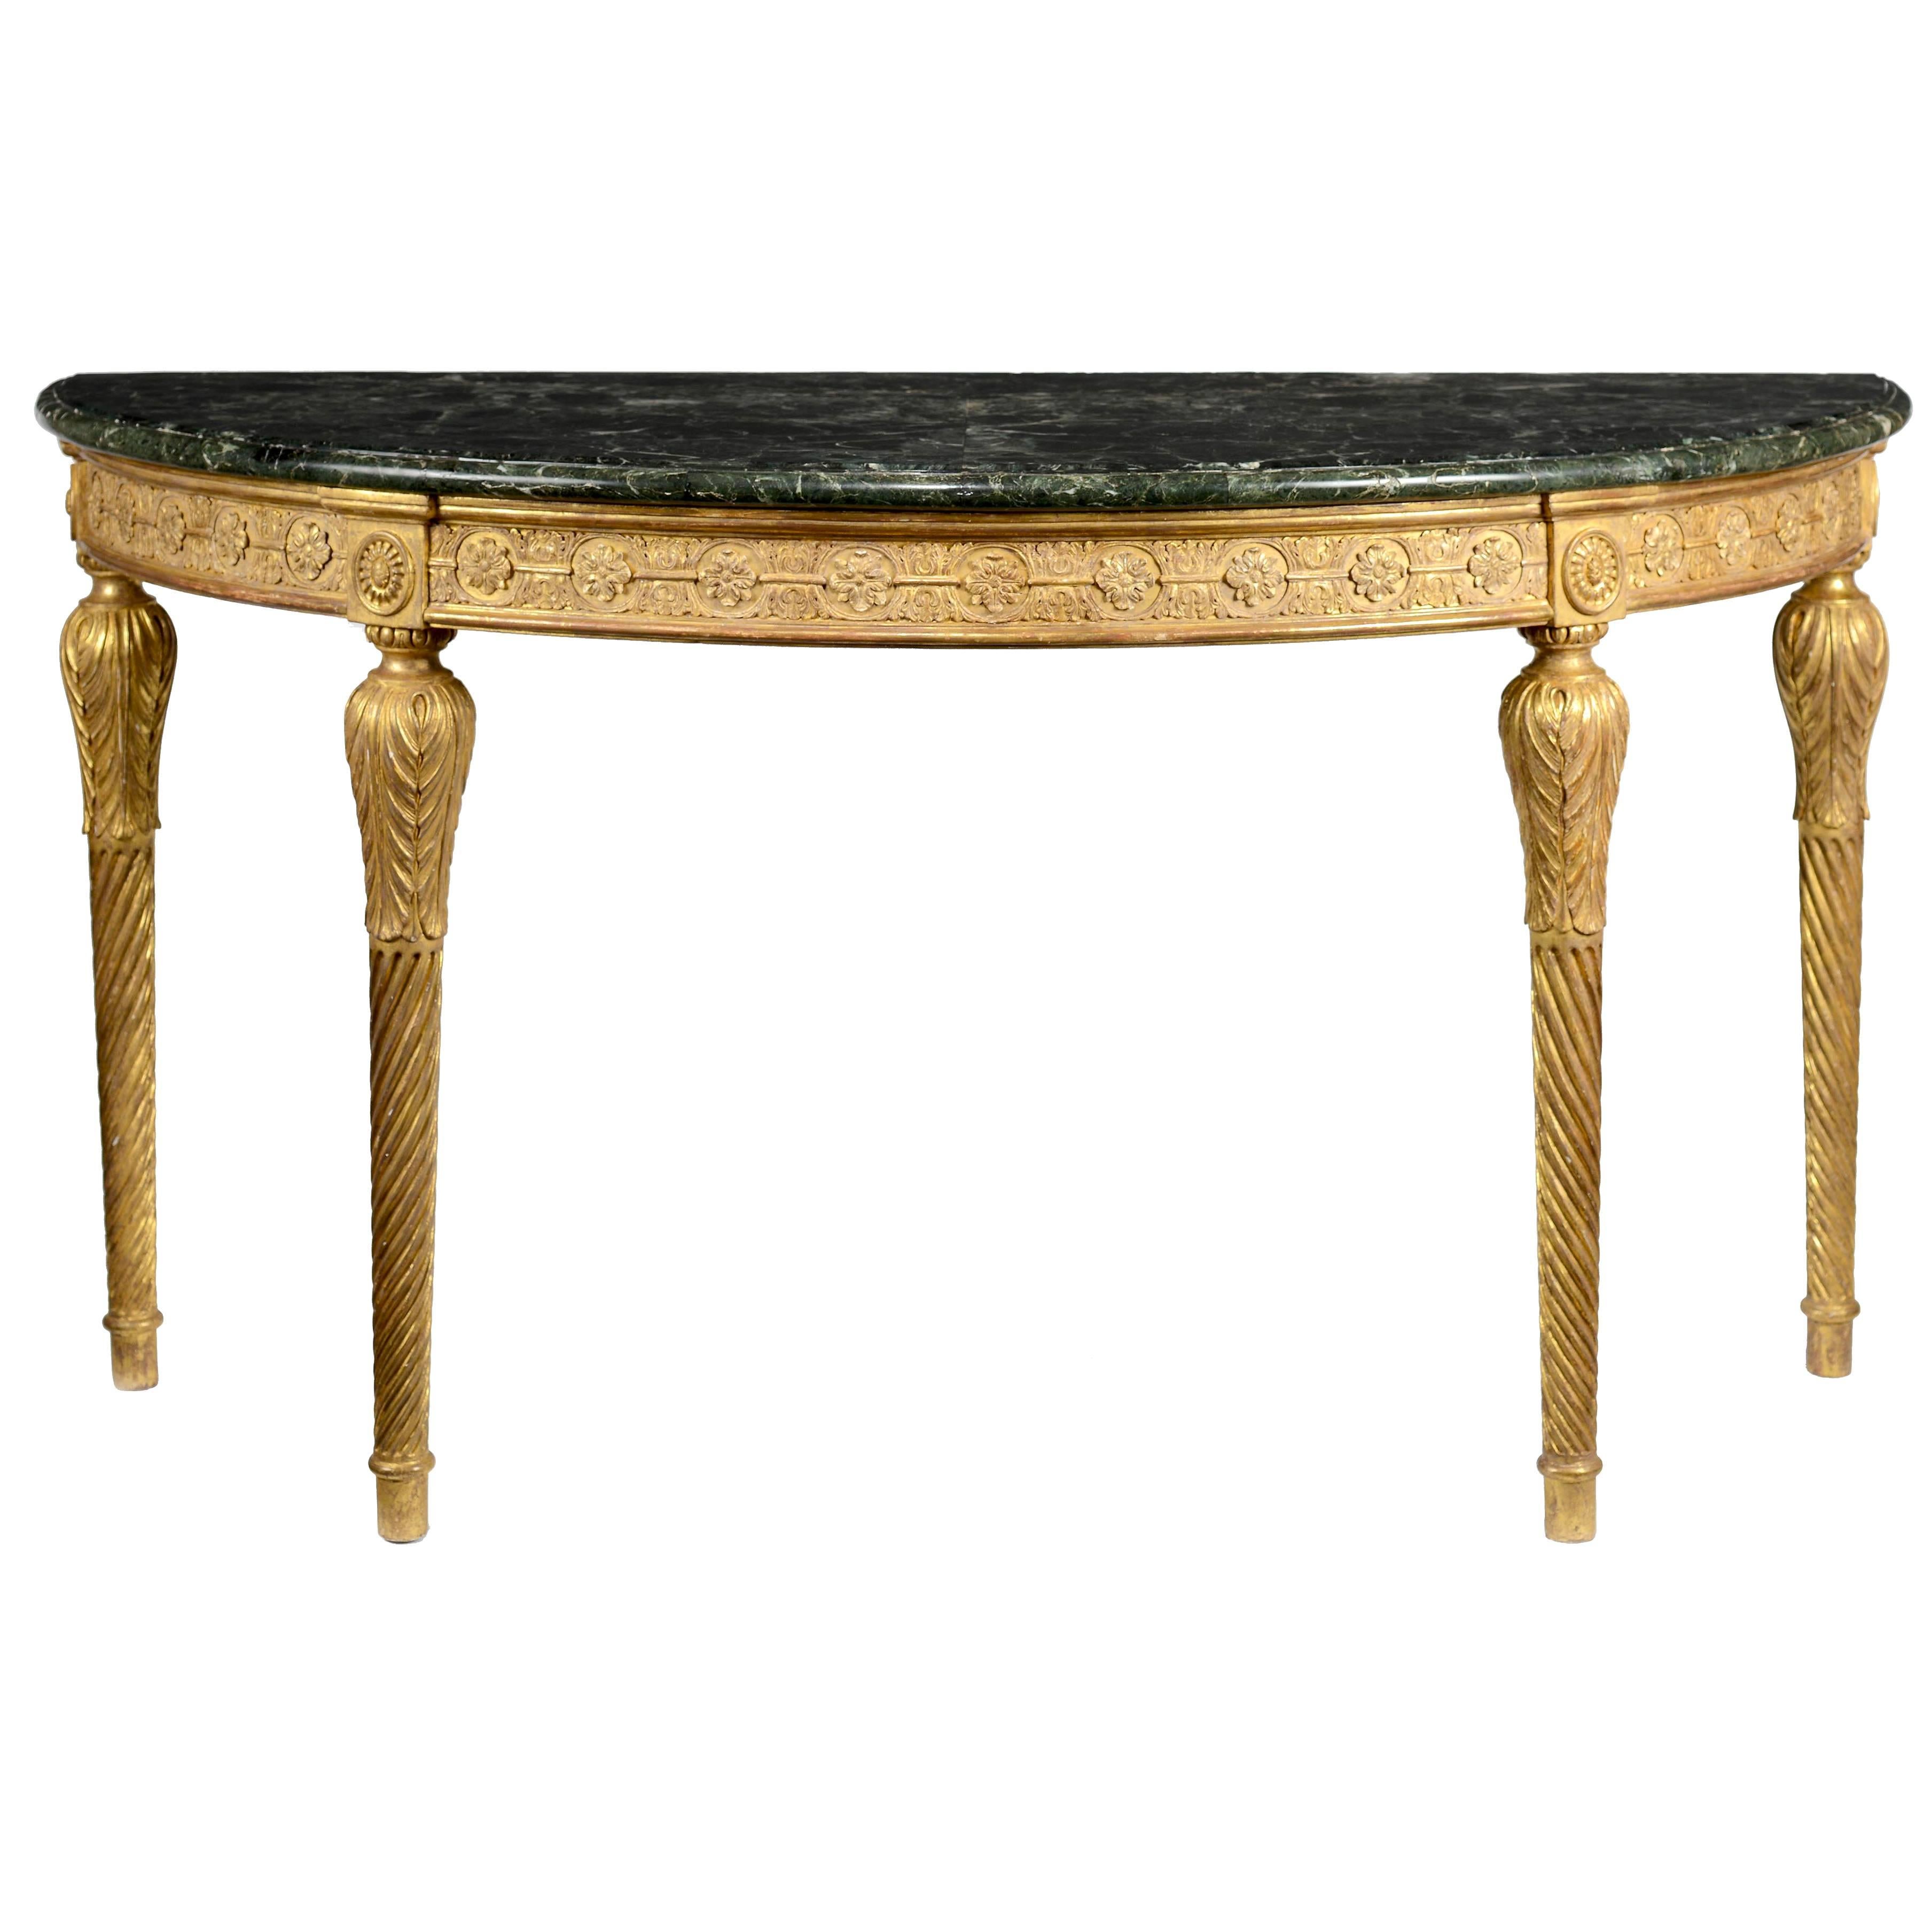 George III Adam Period Carved Giltwood Pier Table For Sale